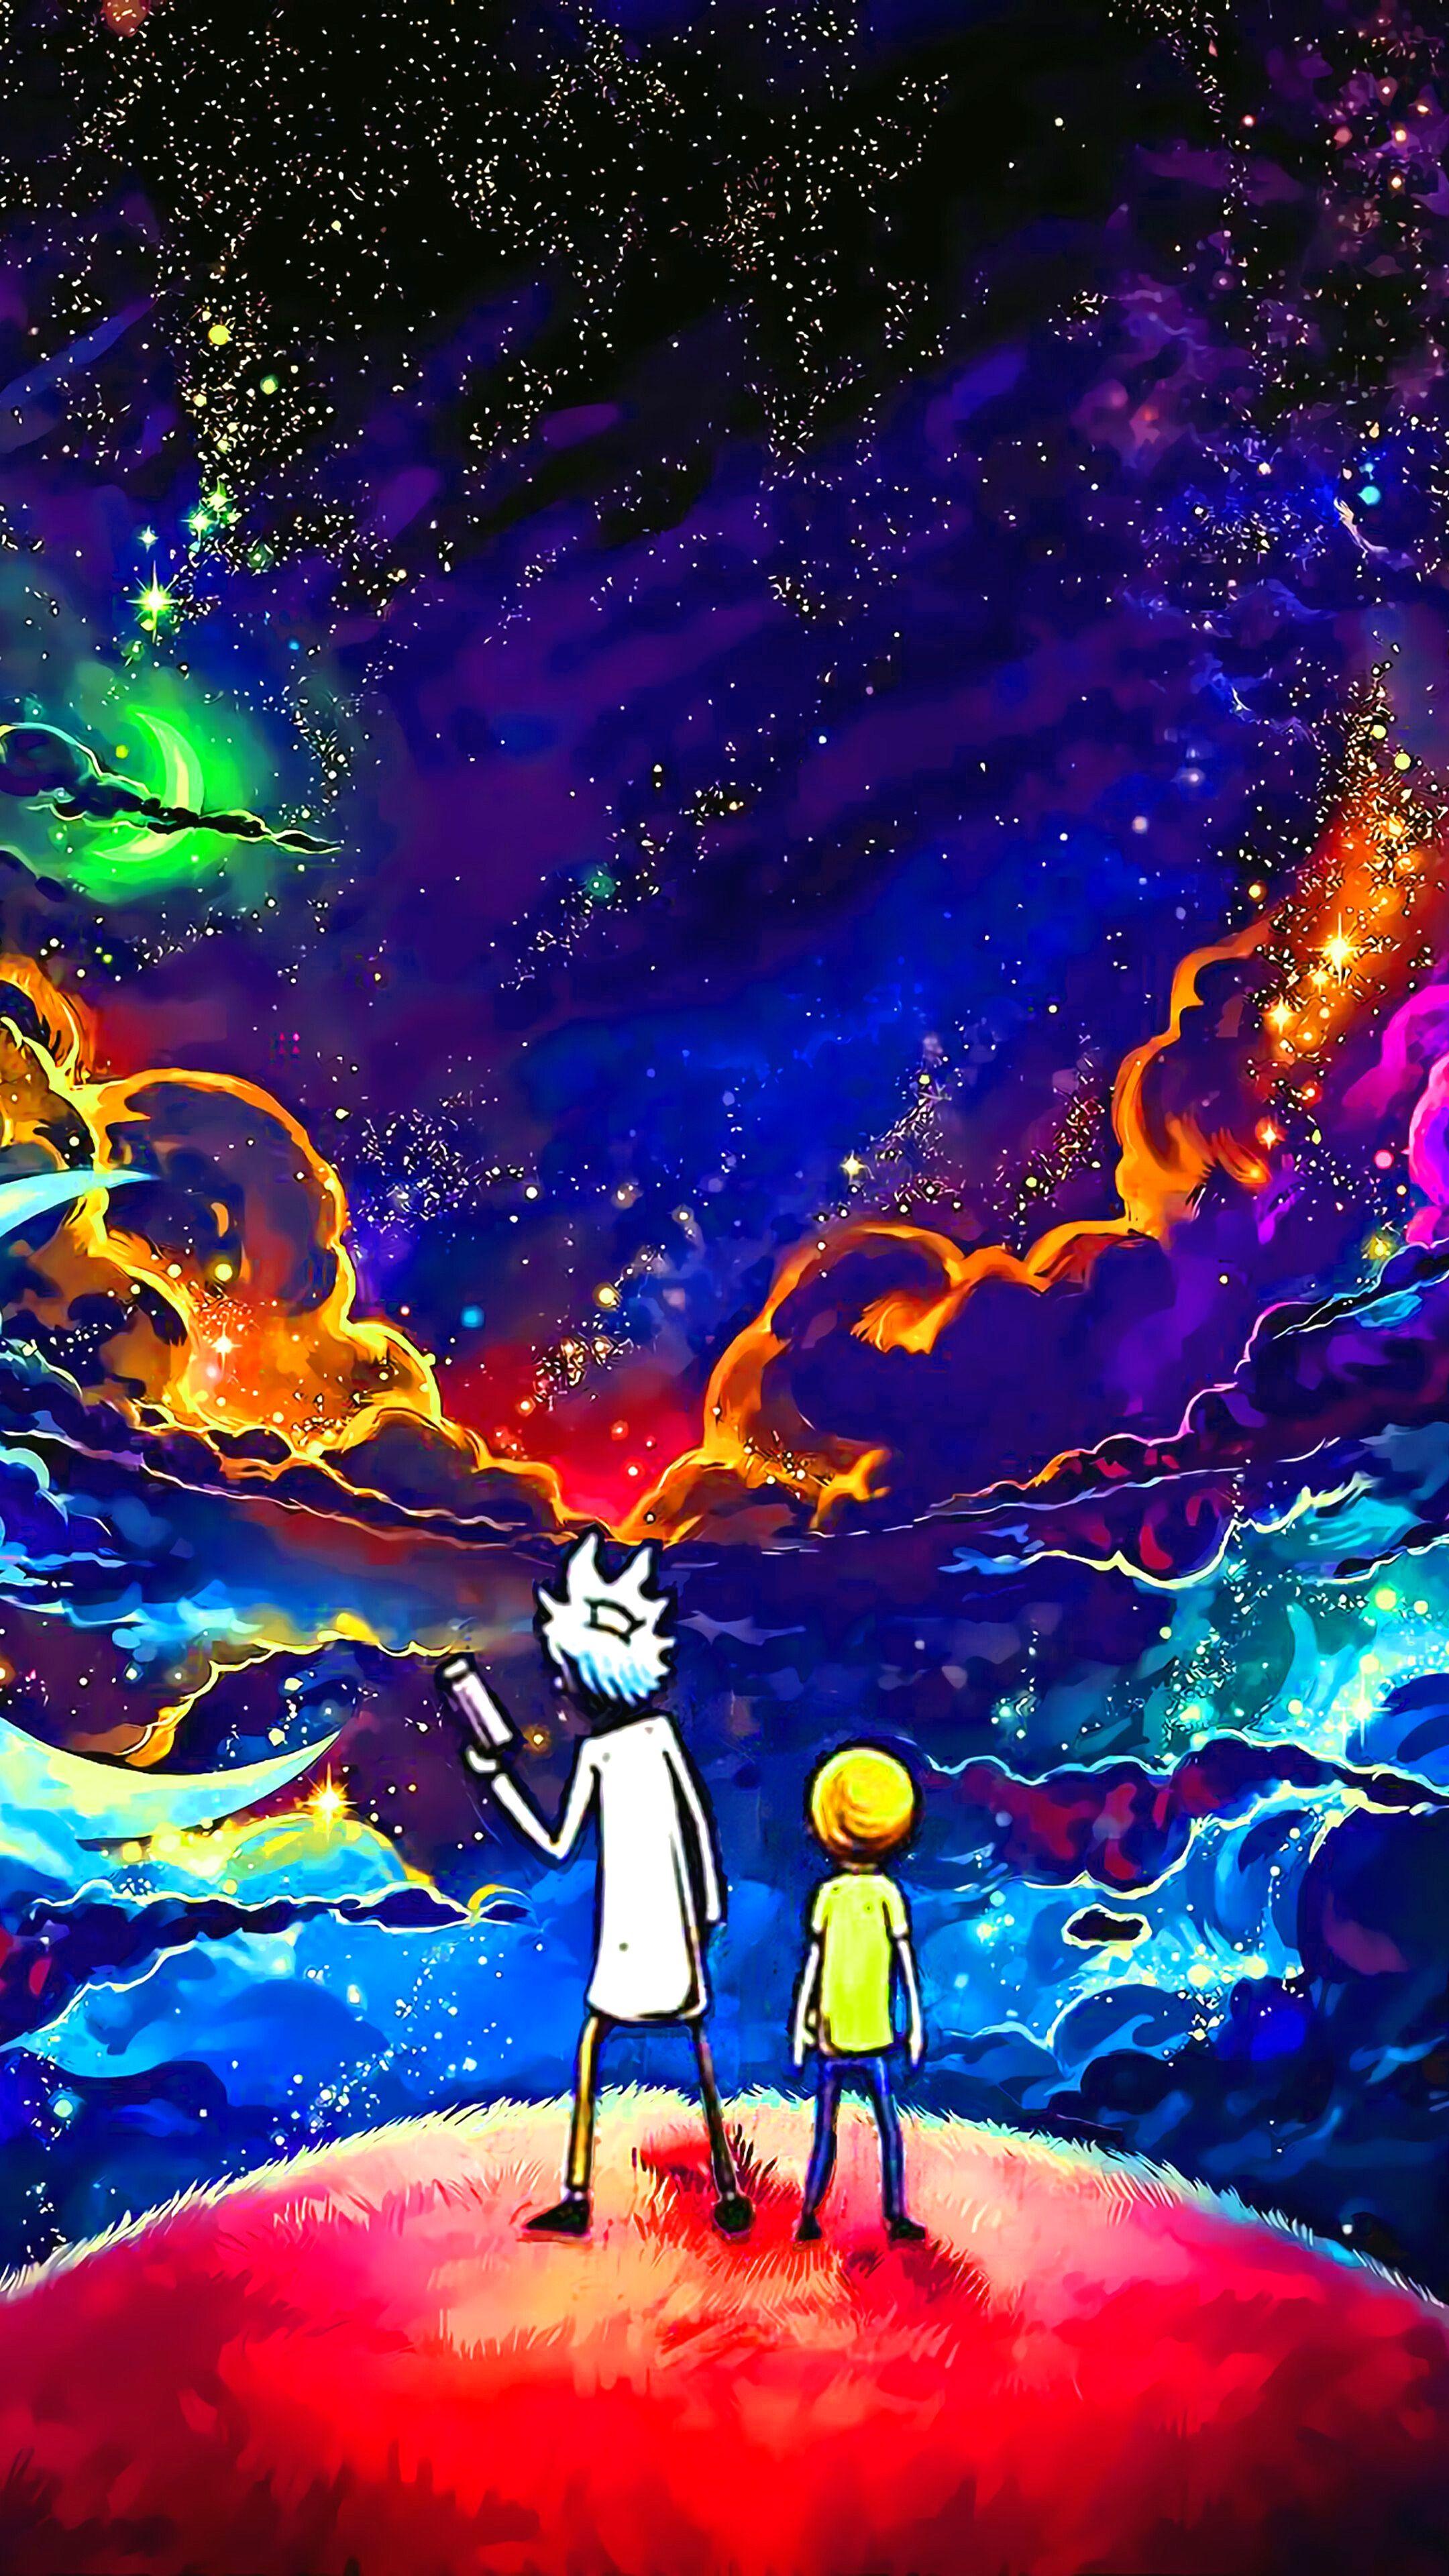 Rick and Morty Trippy on Dog iPhone Wallpapers Free Download